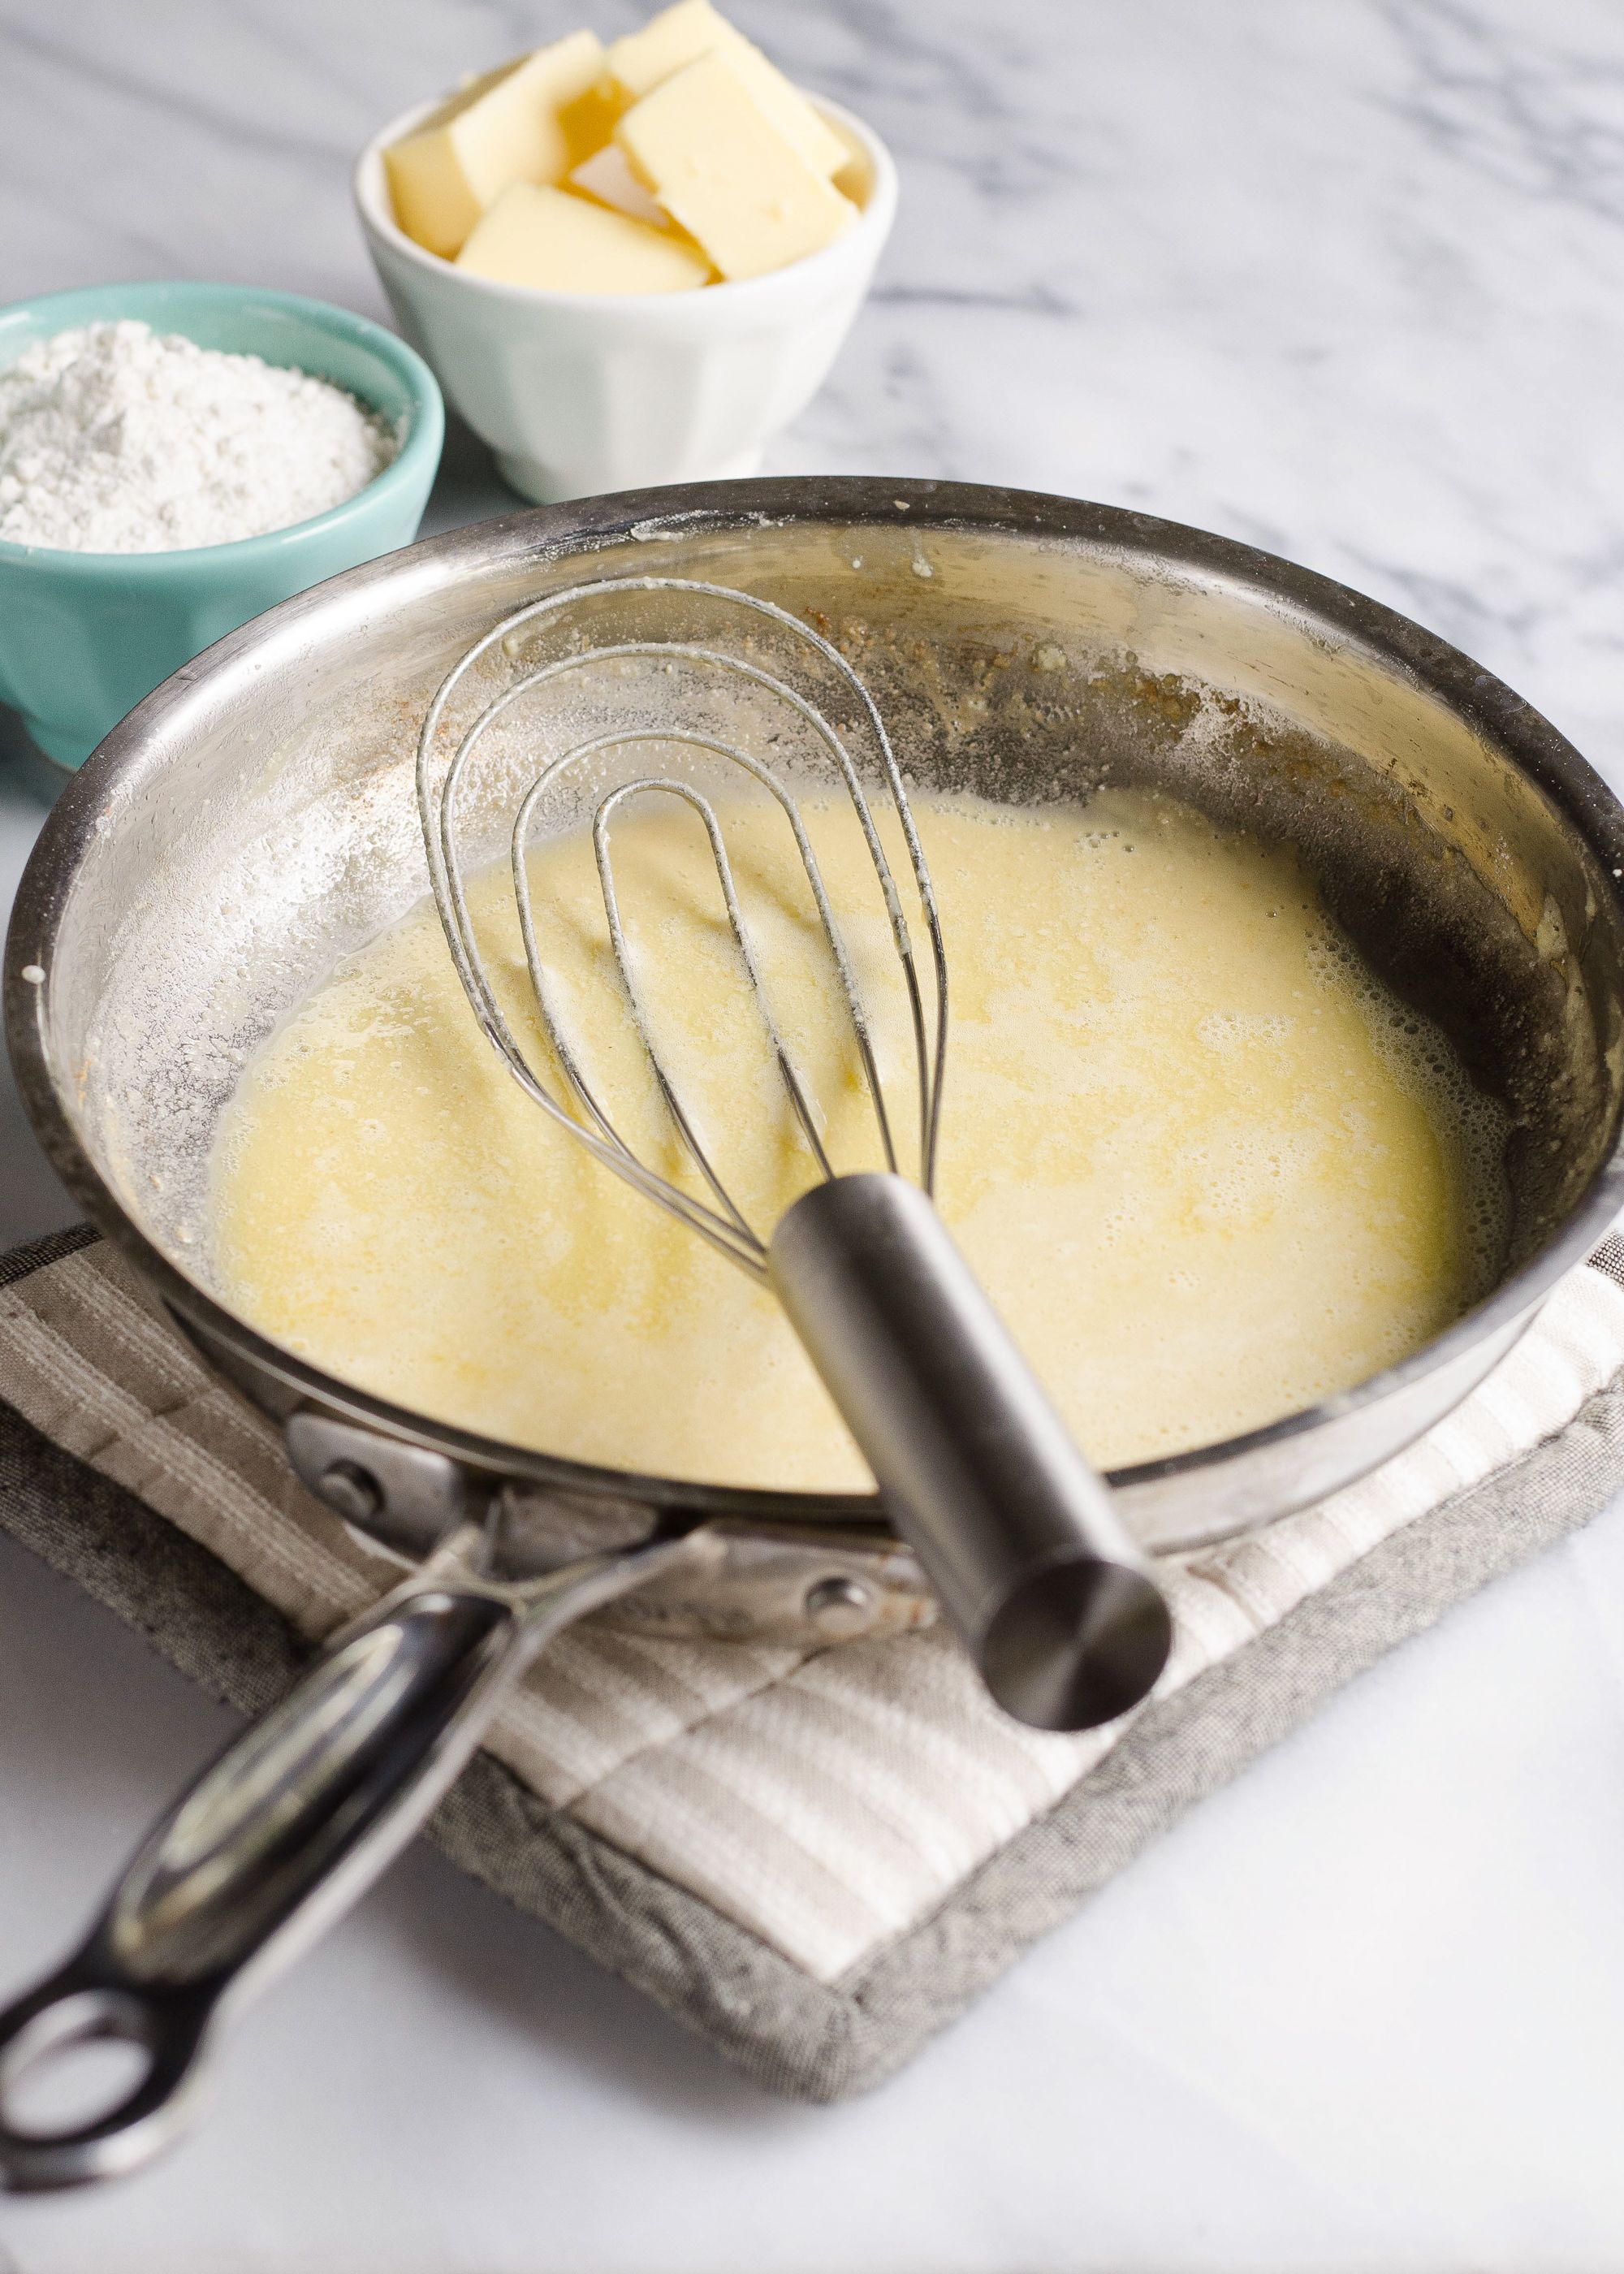 https://hips.hearstapps.com/thepioneerwoman/wp-content/uploads/2017/10/how-to-make-a-roux-09.jpg